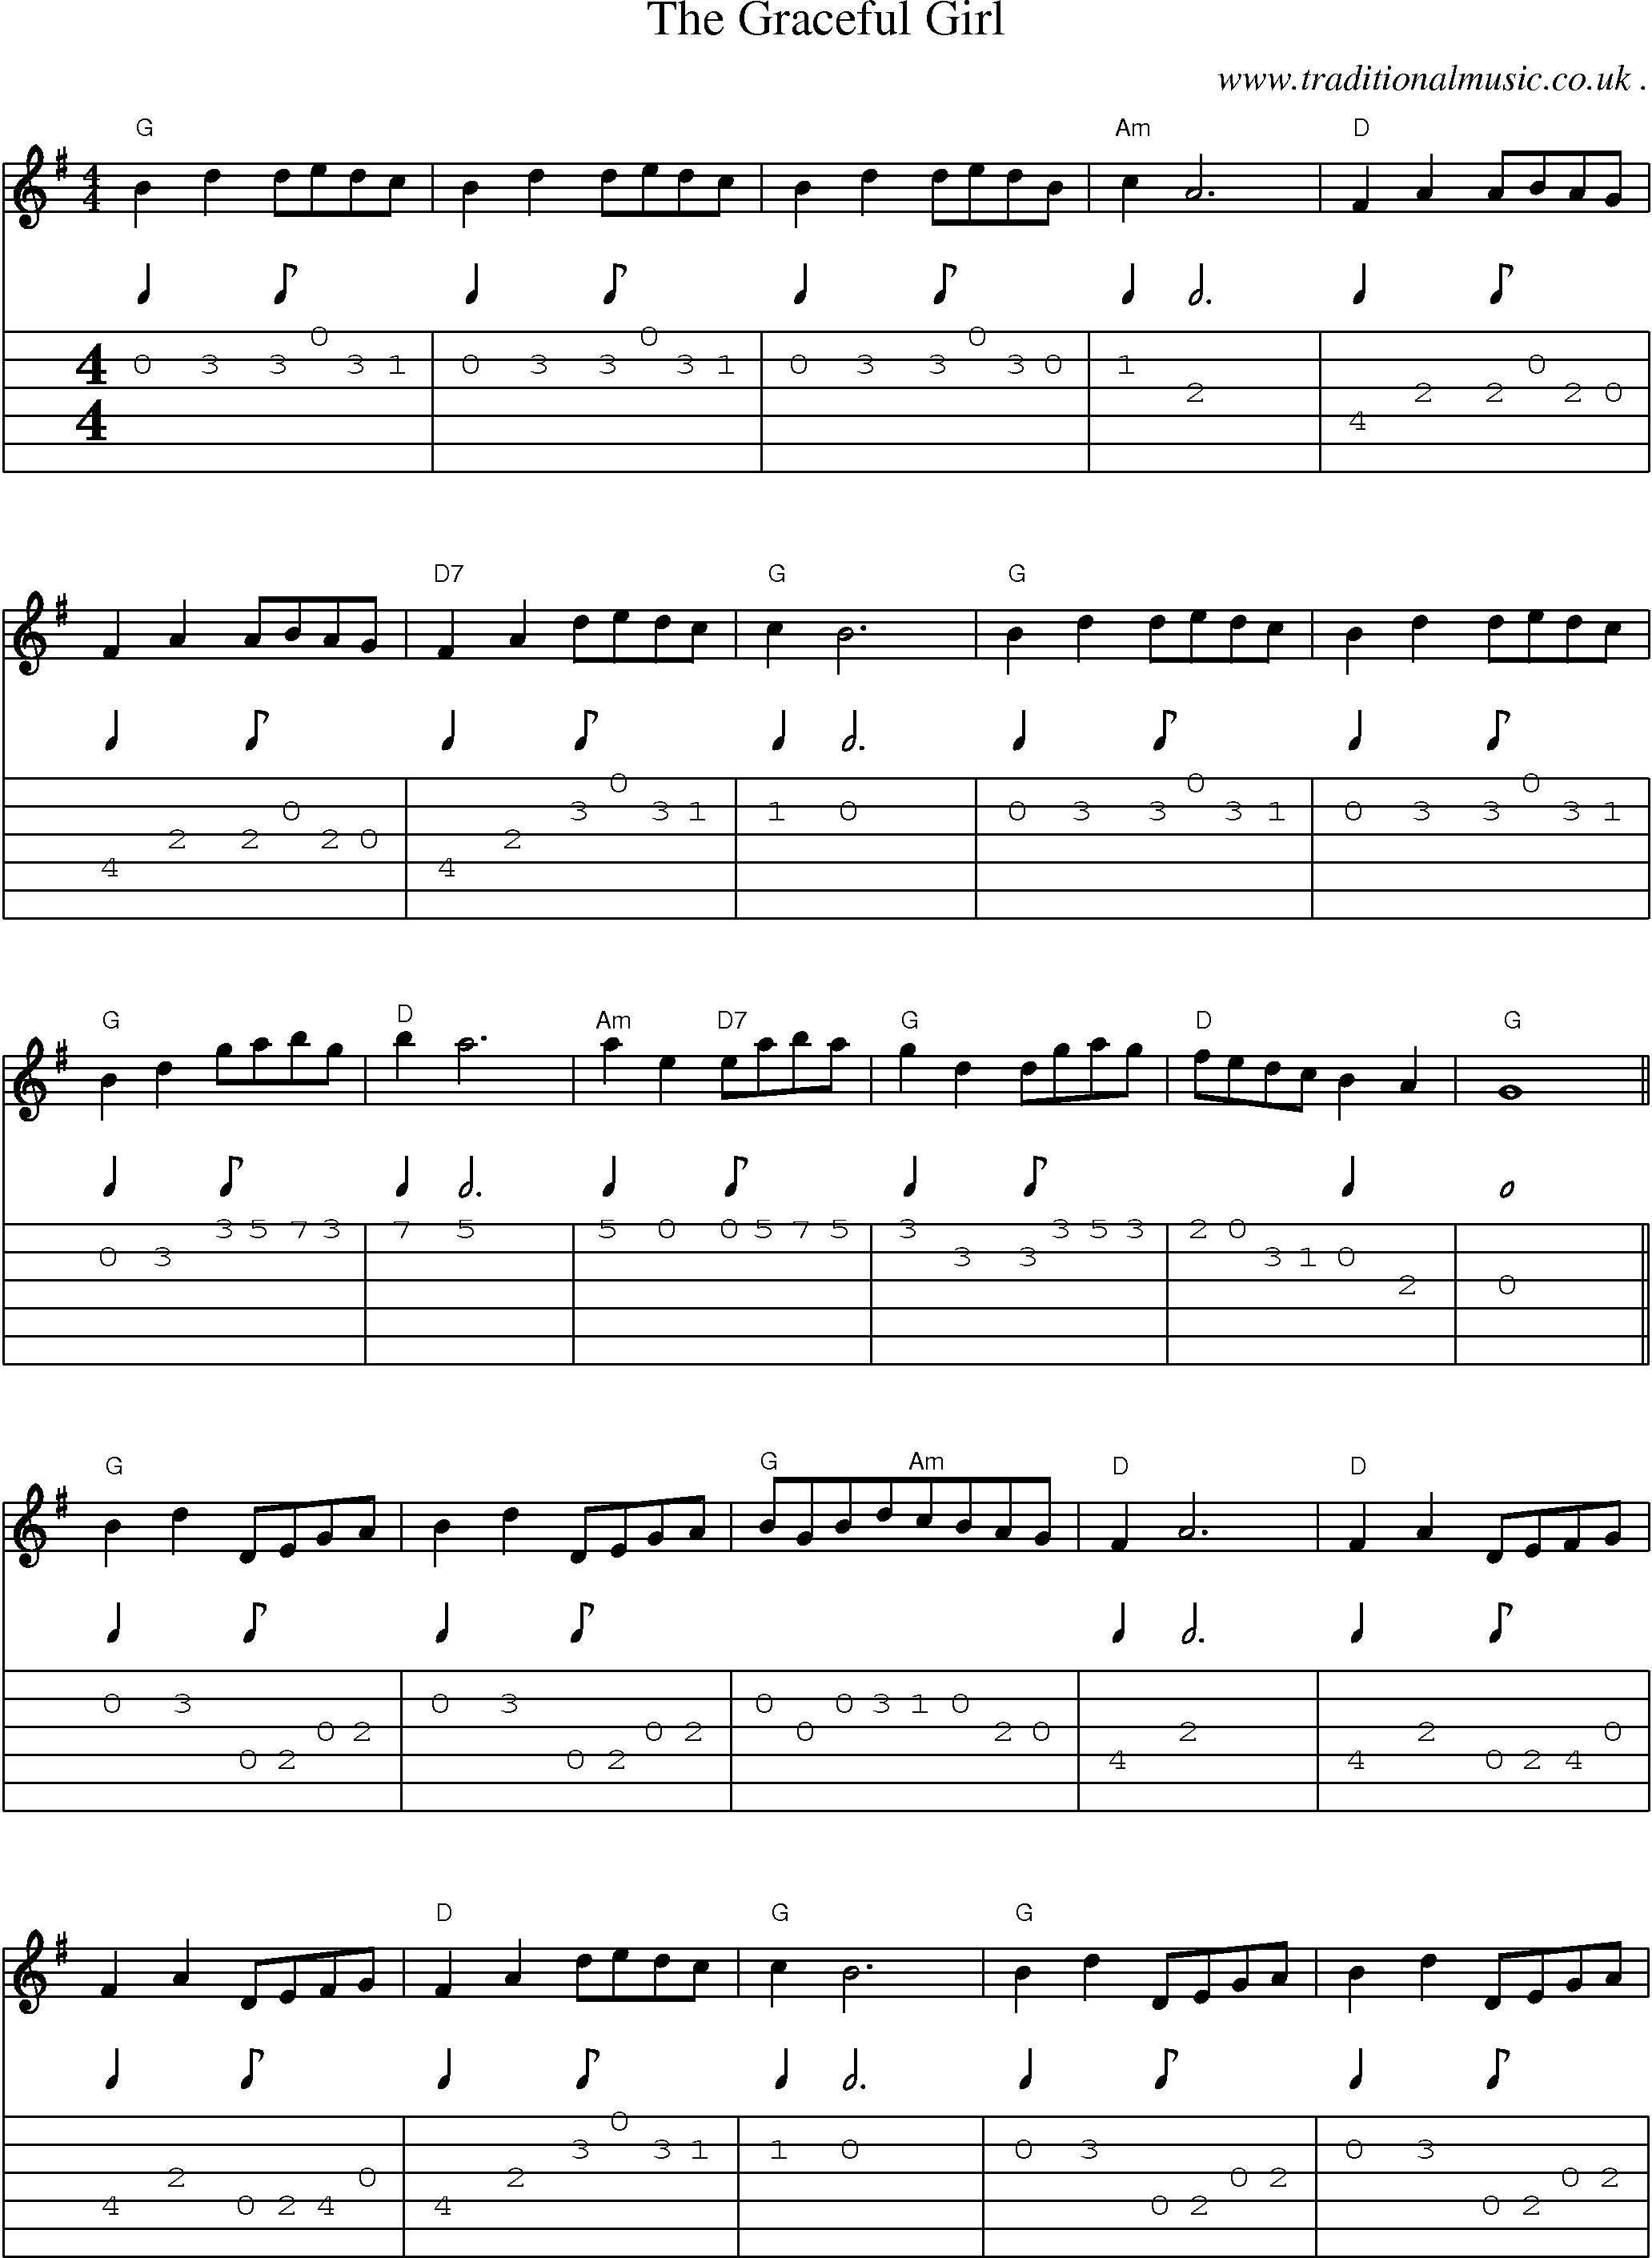 Sheet-Music and Guitar Tabs for The Graceful Girl